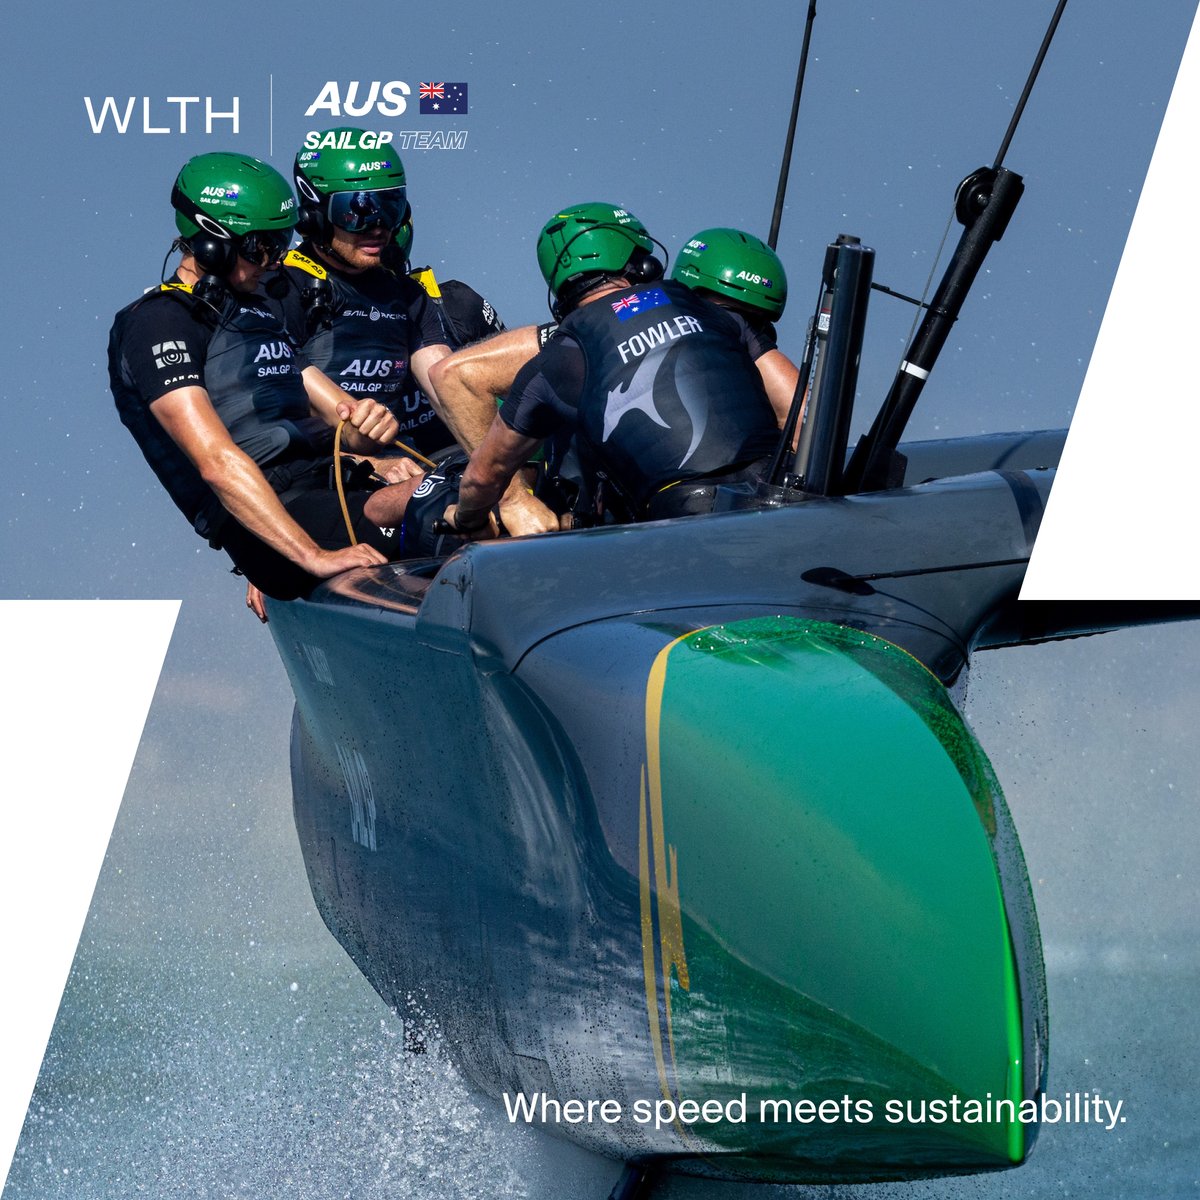 Join the team the works together to make an impact for the environment. WLTH is a digital mortgage lender that converts the Australian SailGP Team's performance into beach cleanups that make a difference.

#beachcleanup #loansfortheoceans #impactlender